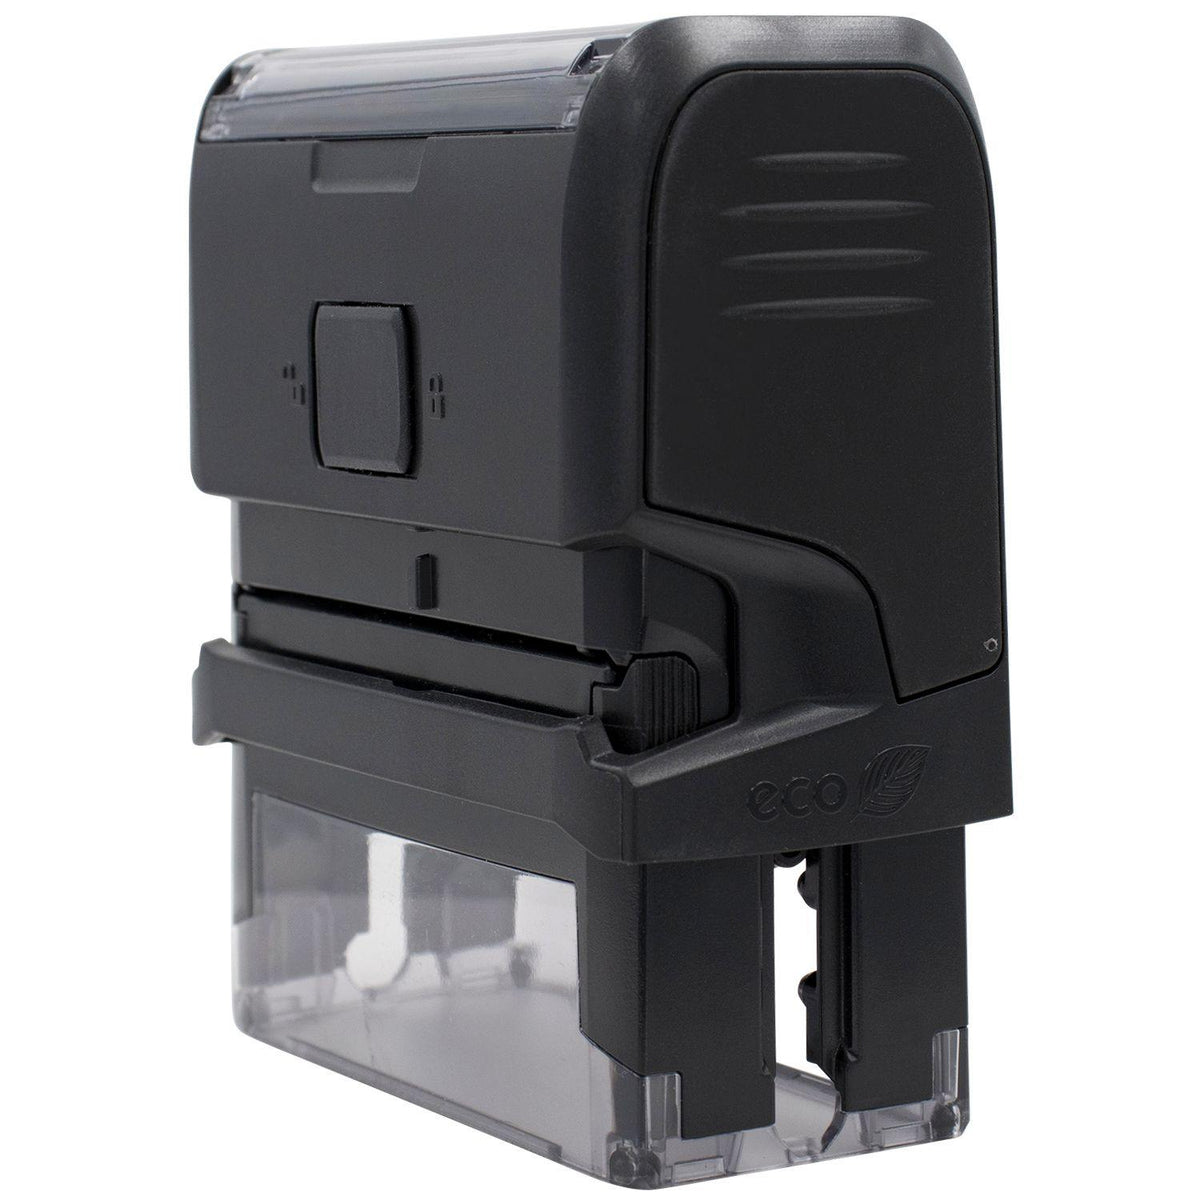 Side View of Large Self-Inking Asymptomatic Stamp at an Angle